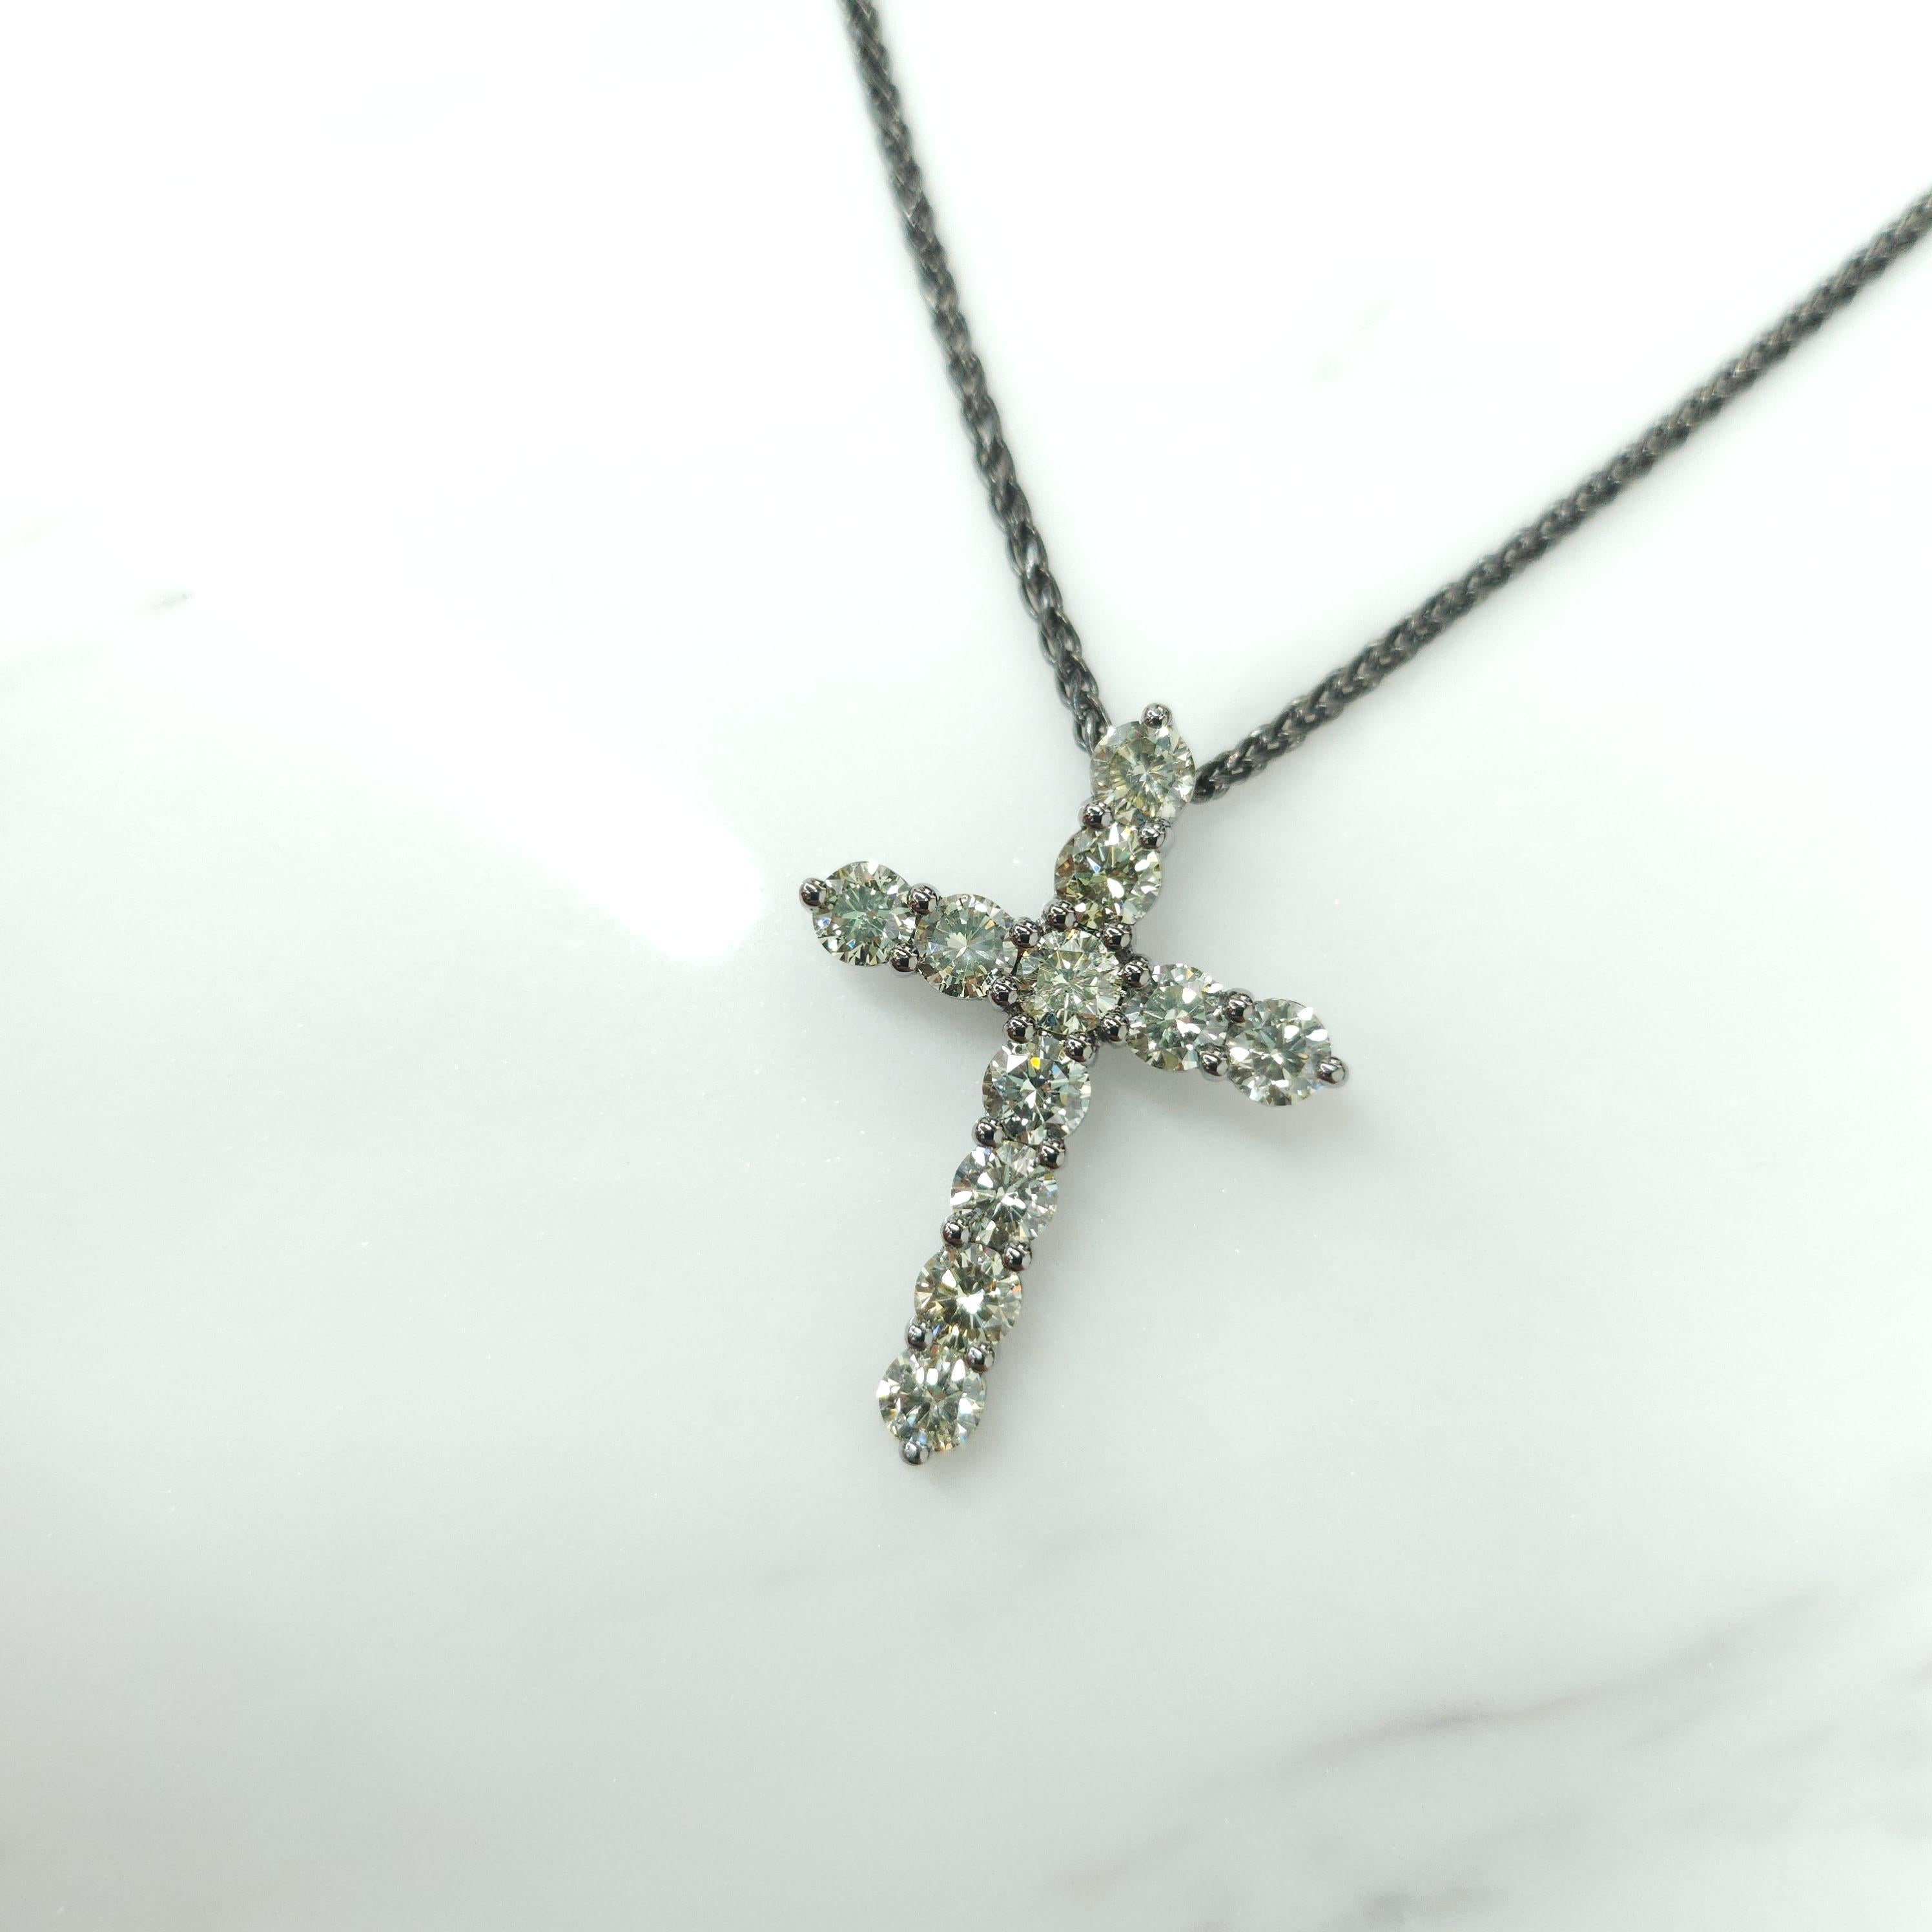 A precious interpretation of a classic motif, our cross pendant in 18K black gold is available in a variety of different carat weights, seen here with 0.22 carat diamonds. Deftly suspended from a gold chain, each diamond is embraced by a minimal